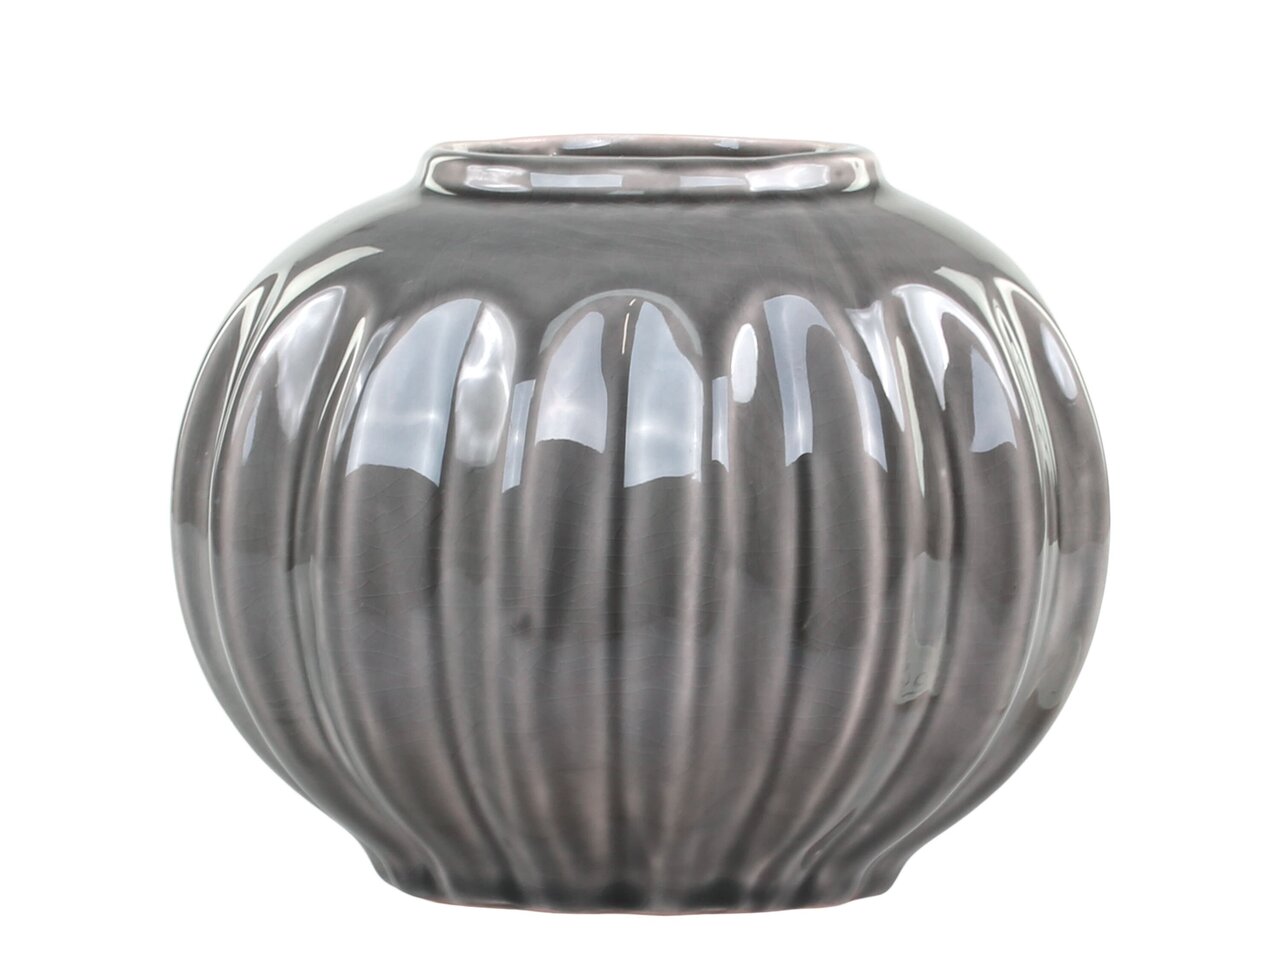 Chic Antique Alsace Vase mit Muster Preview Image